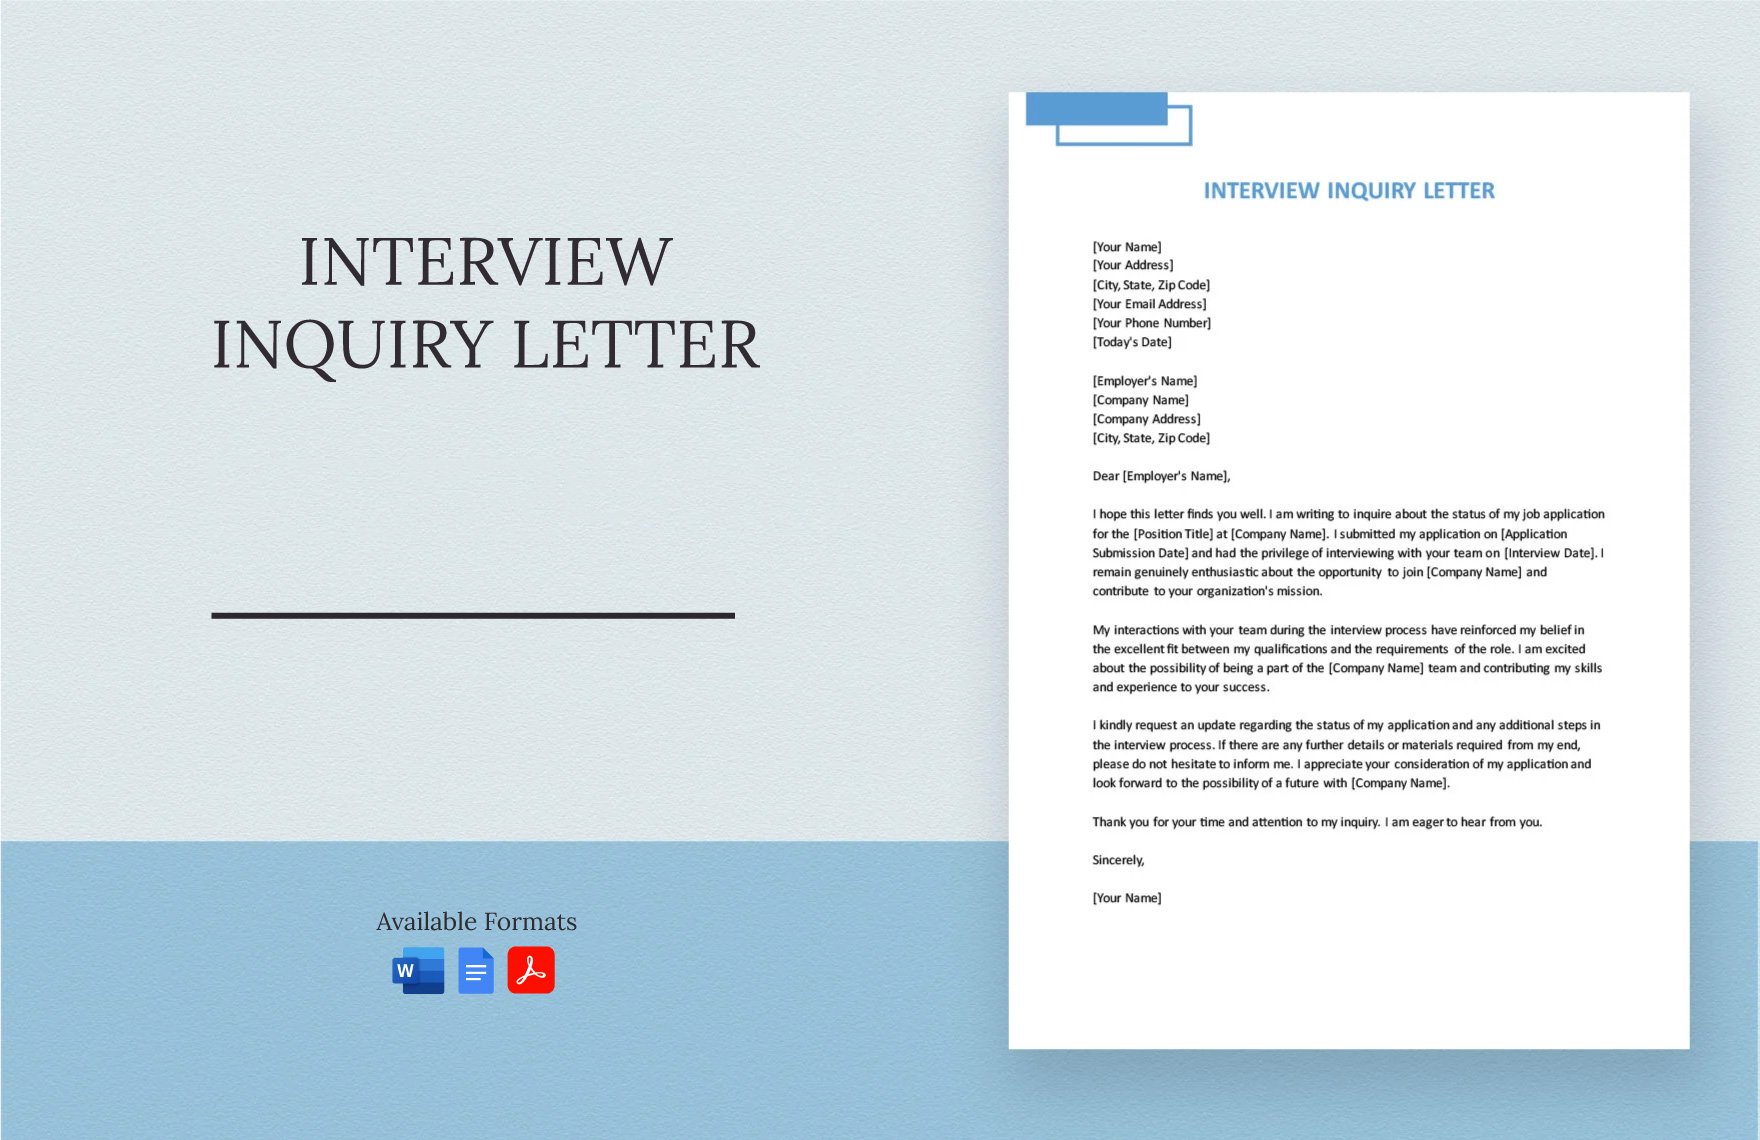 Interview Inquiry Letter in Word, Google Docs, PDF